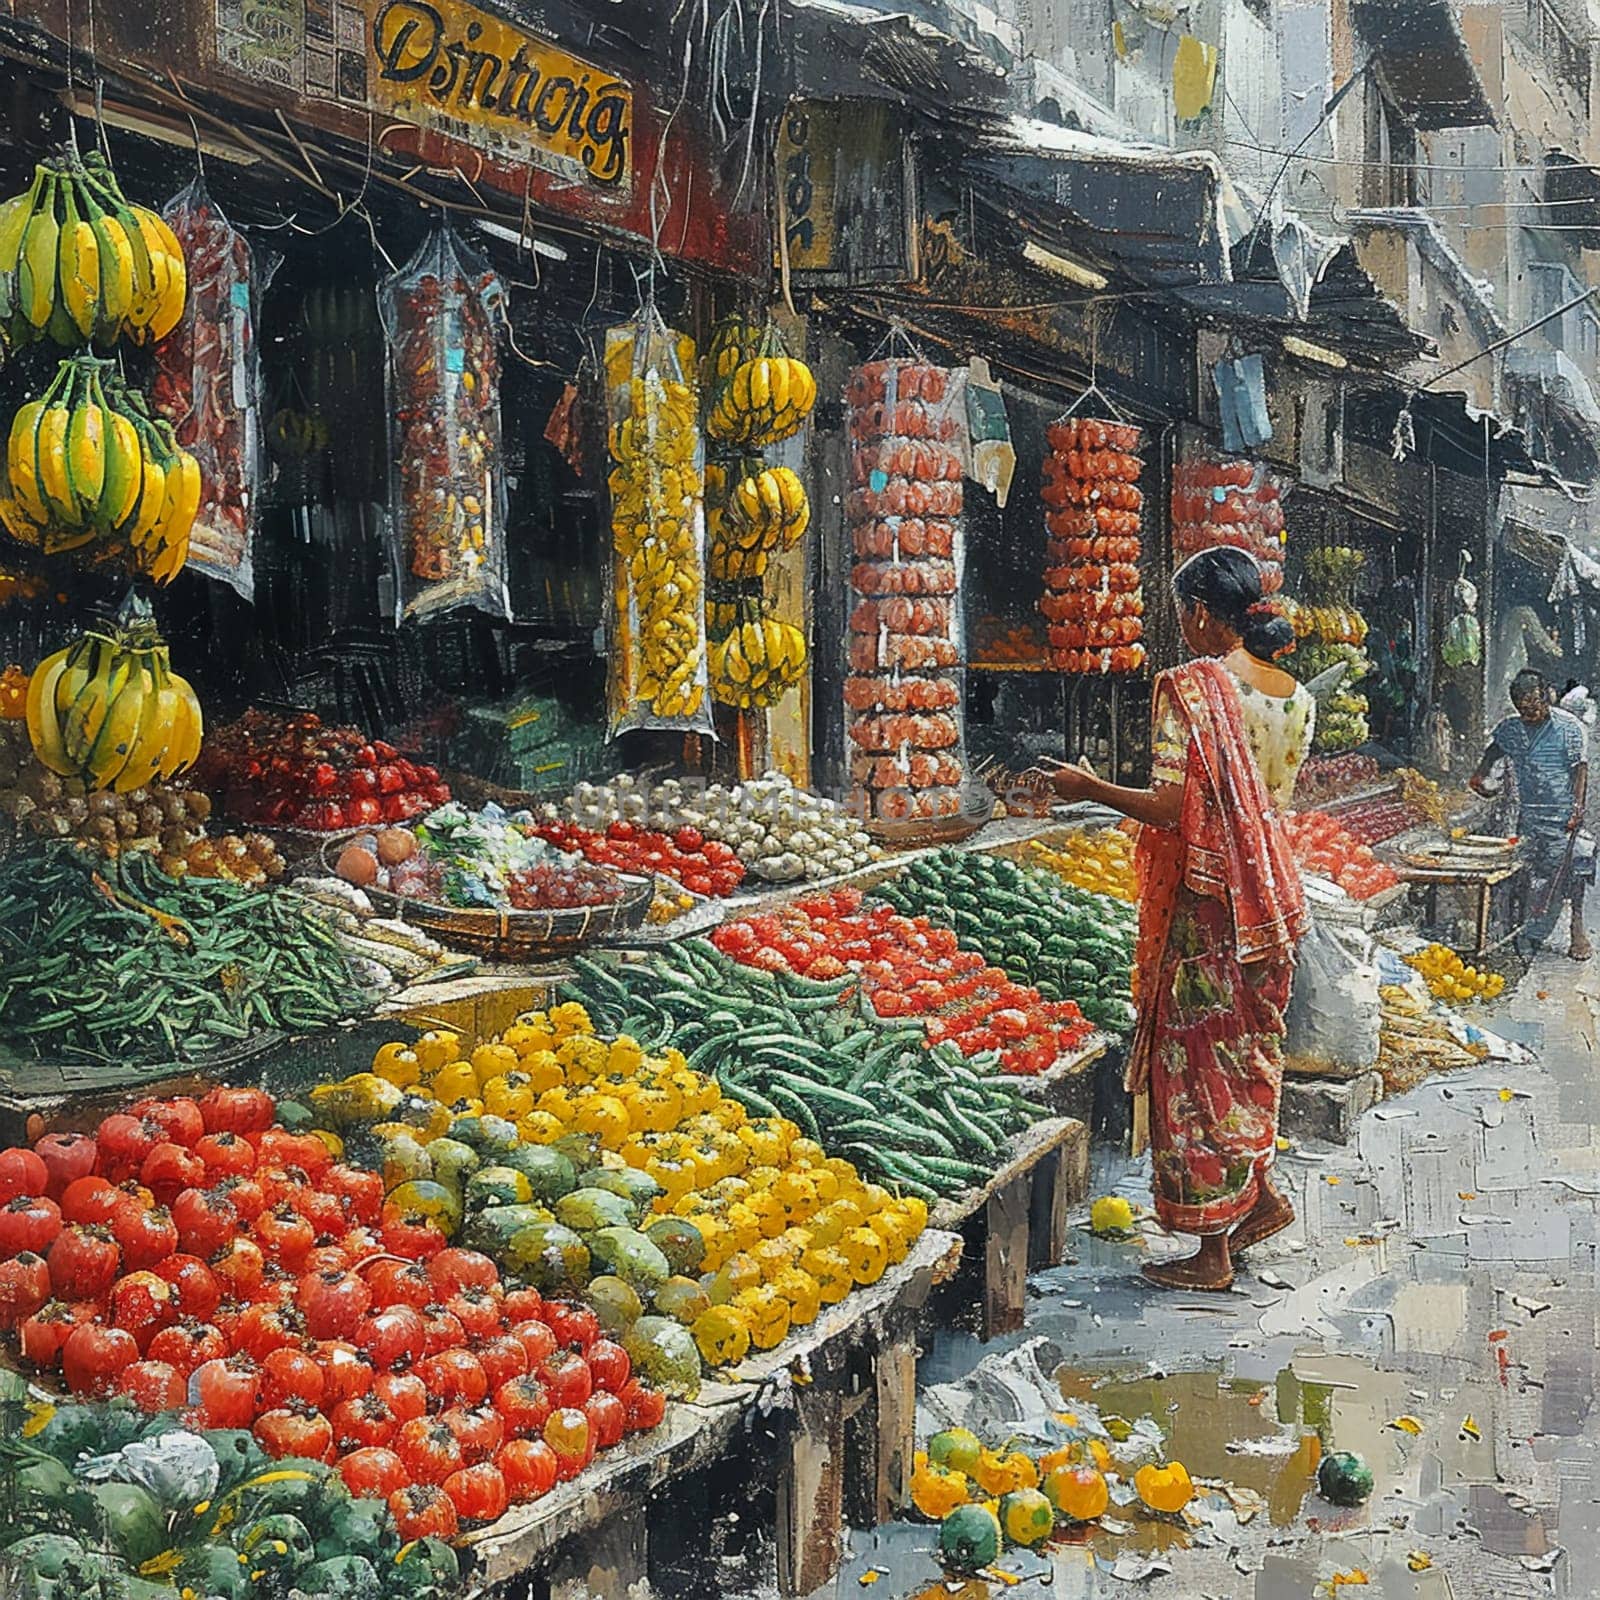 The vibrant hustle of a street market, captured in the colors and textures of goods.